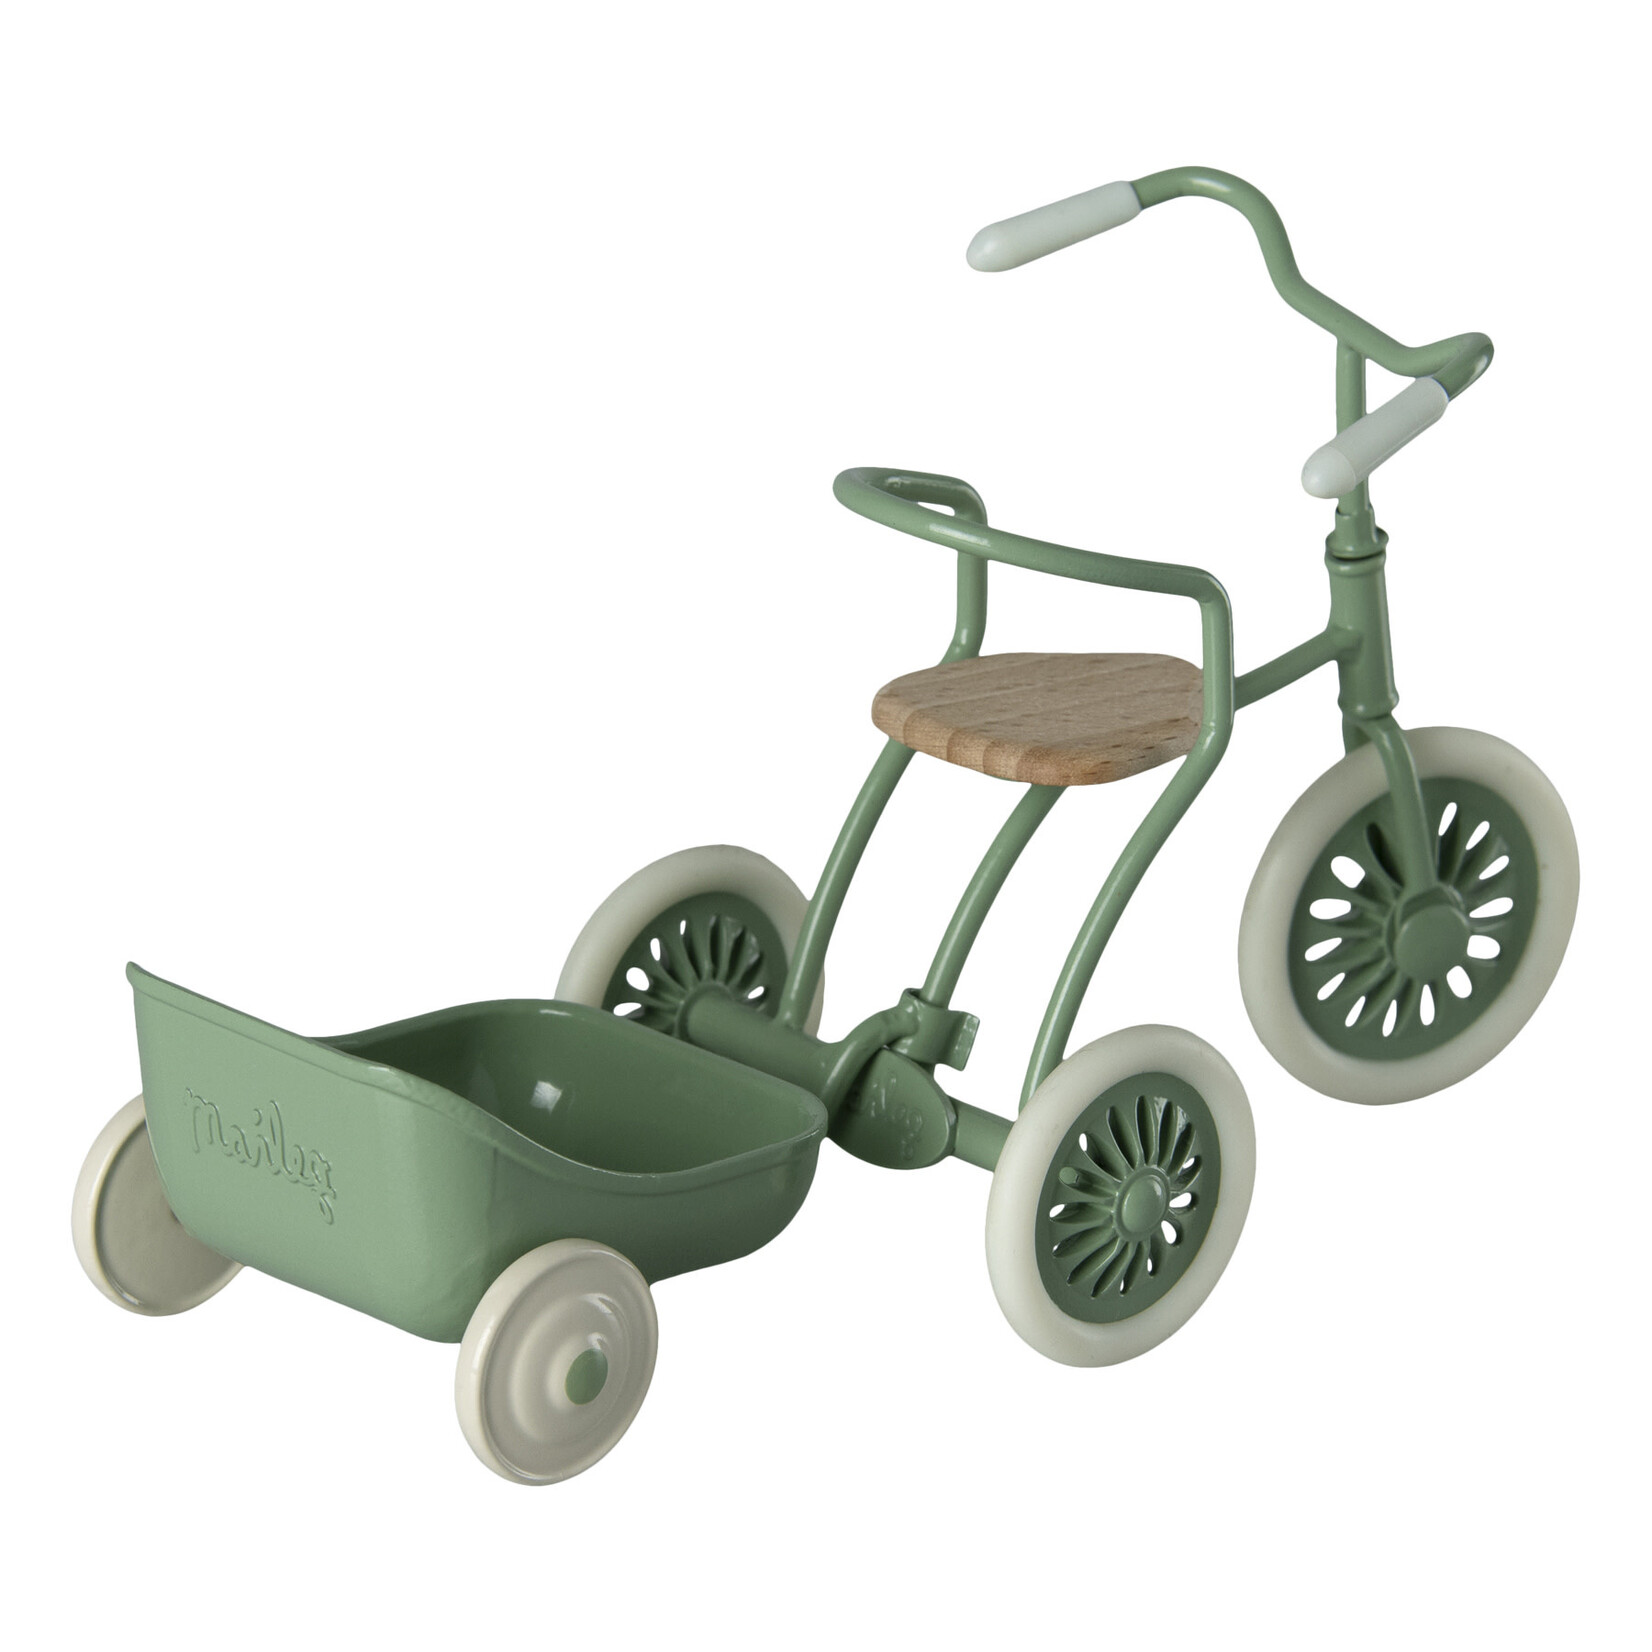 Maileg Maileg Tricycle hanger Green Trailer add on for Mouse